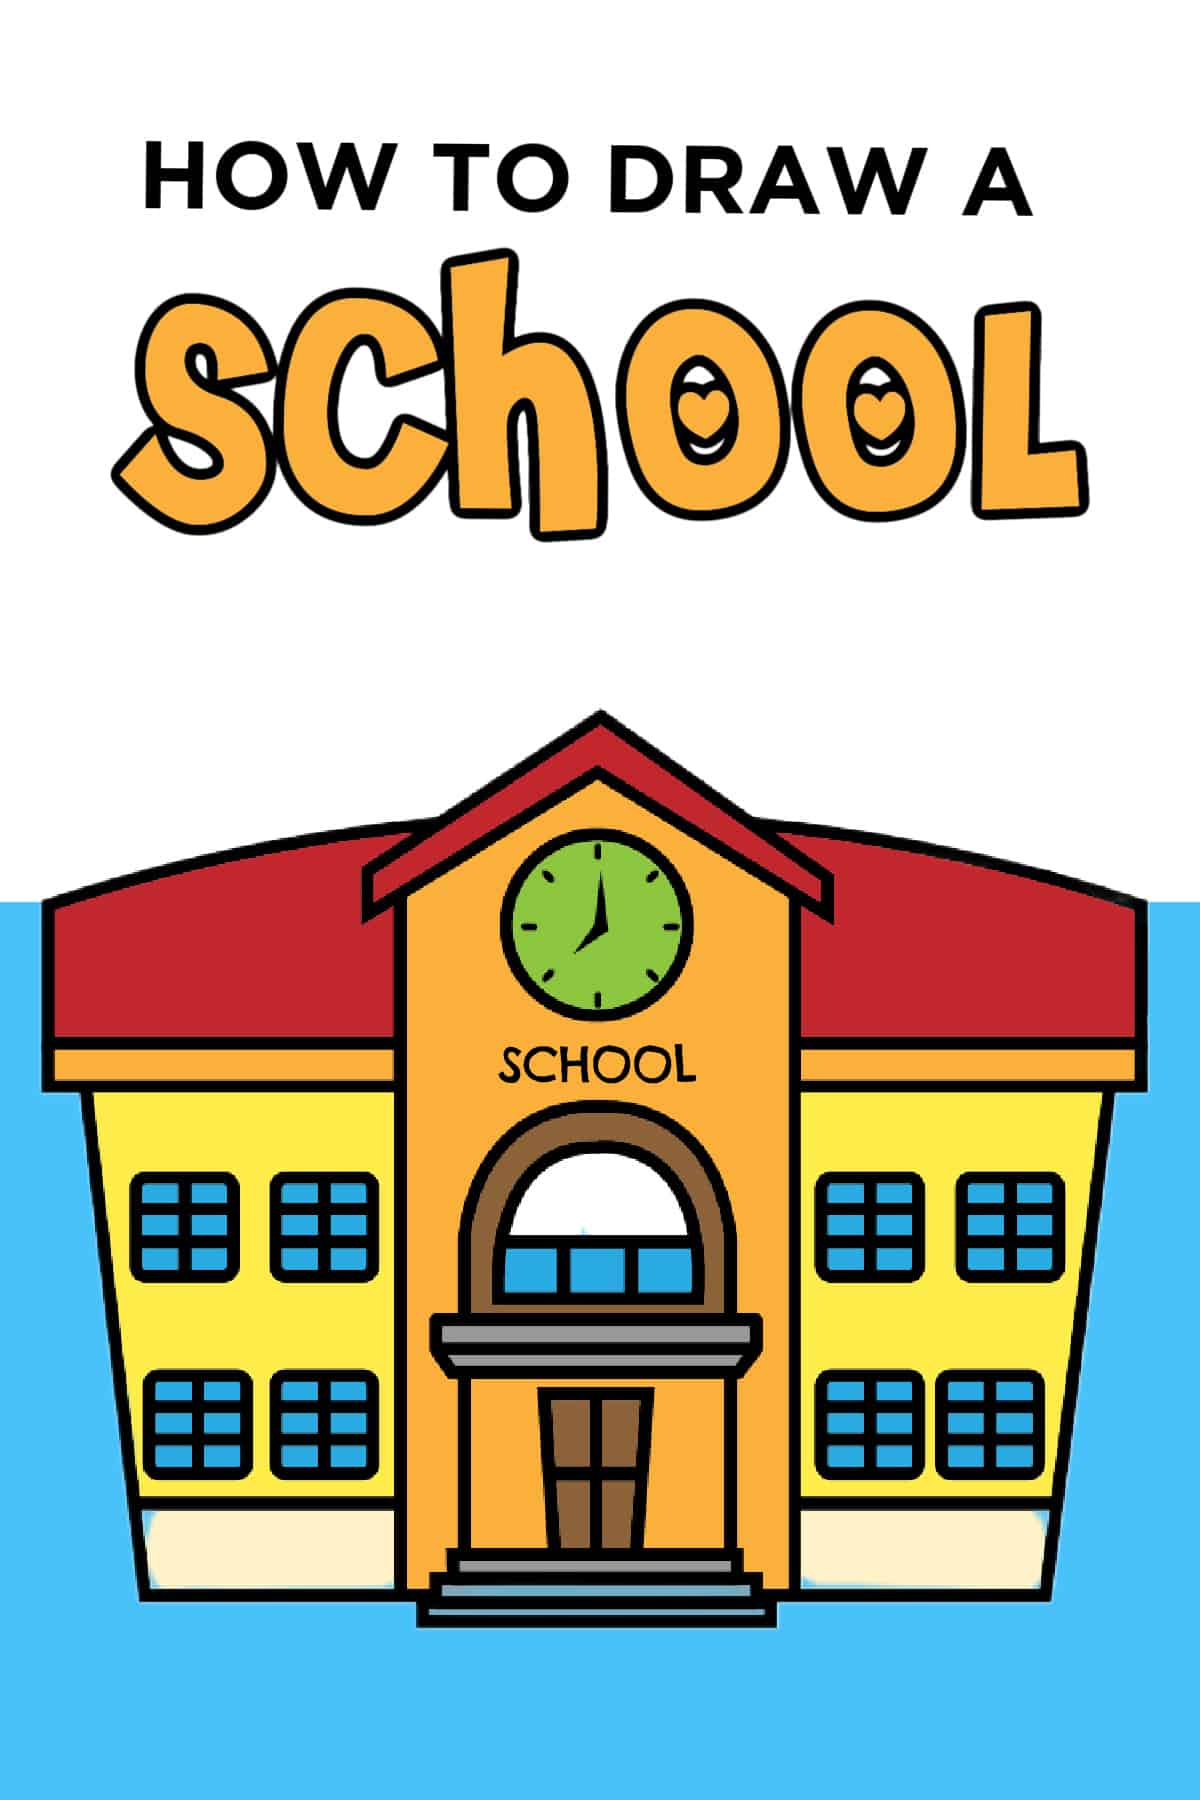 How to Draw a School | A Step-by-Step Tutorial for Kids